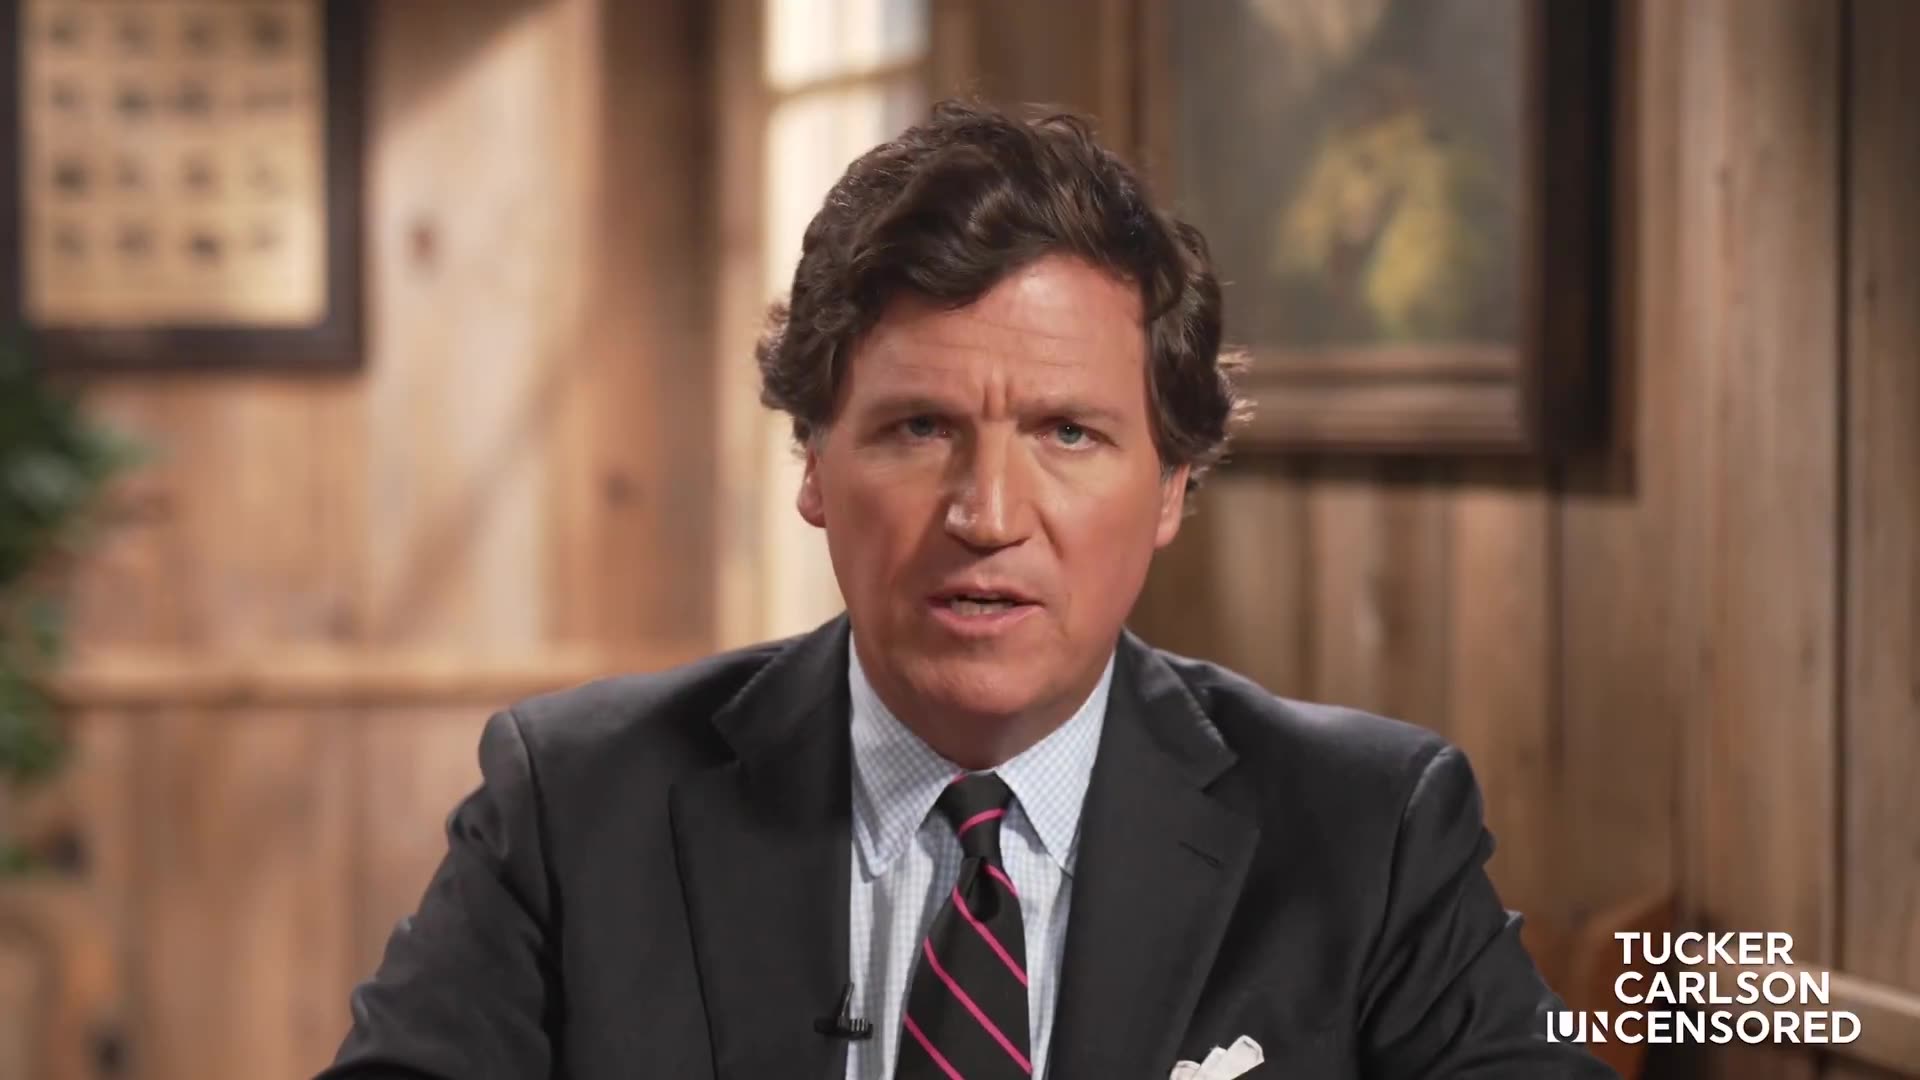 Tucker Carlson: 1 in 5 Mail-In Ballots Last Presidential Election Were Fraudulent